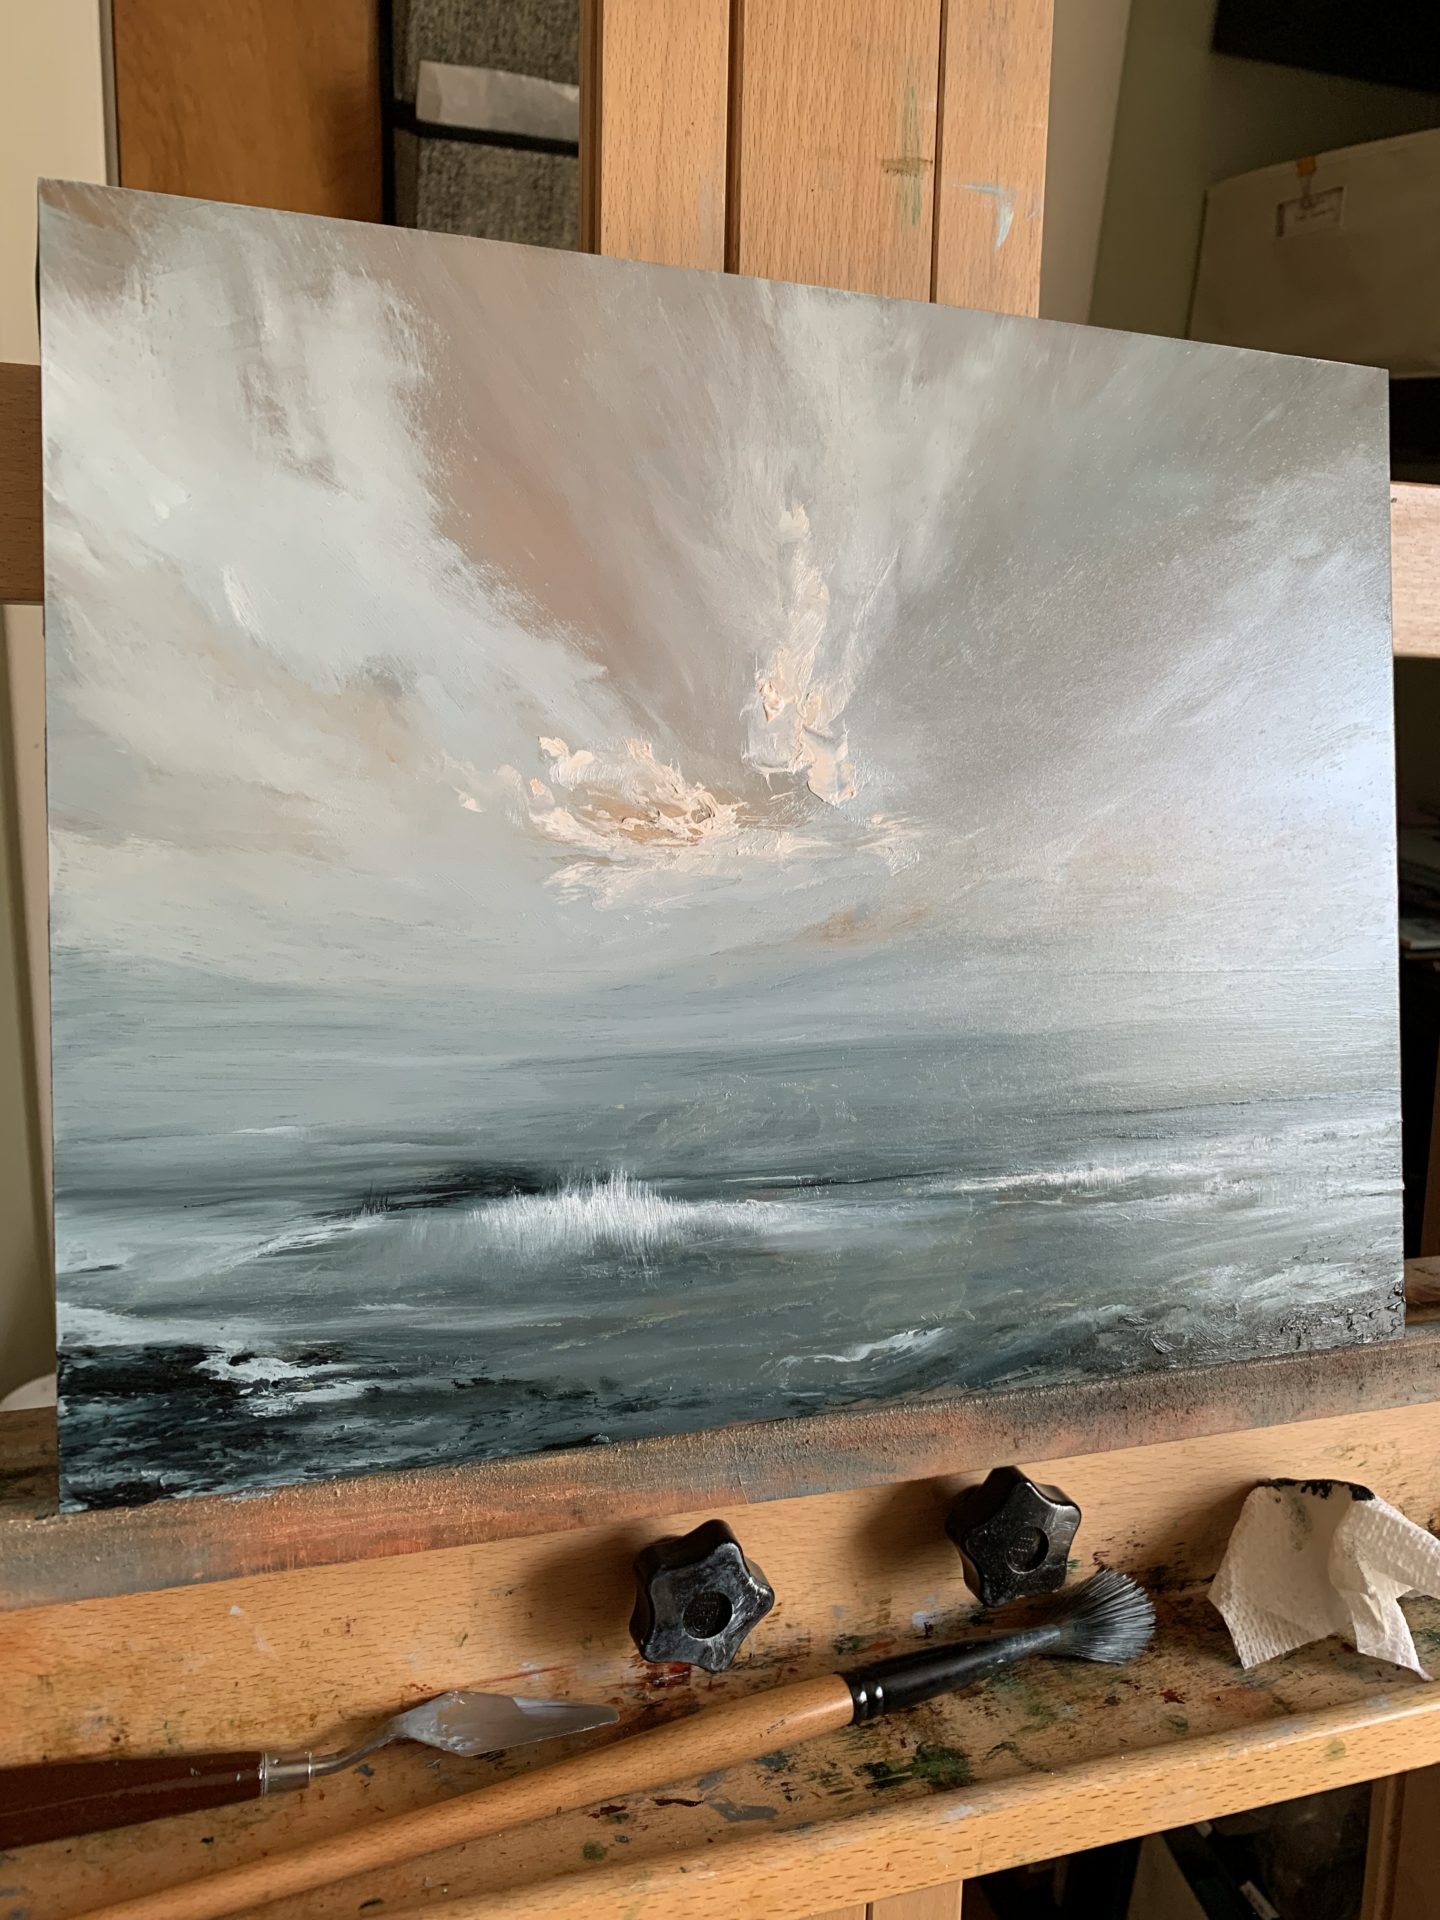 Photo of an original oil painting by Tisha Mark, "A Little Light, At Last" 11"x14" oil on cradled gessobord (2024). Light emerges in an orange toned stormy sky over a stormy sea. Shown here on an easel.